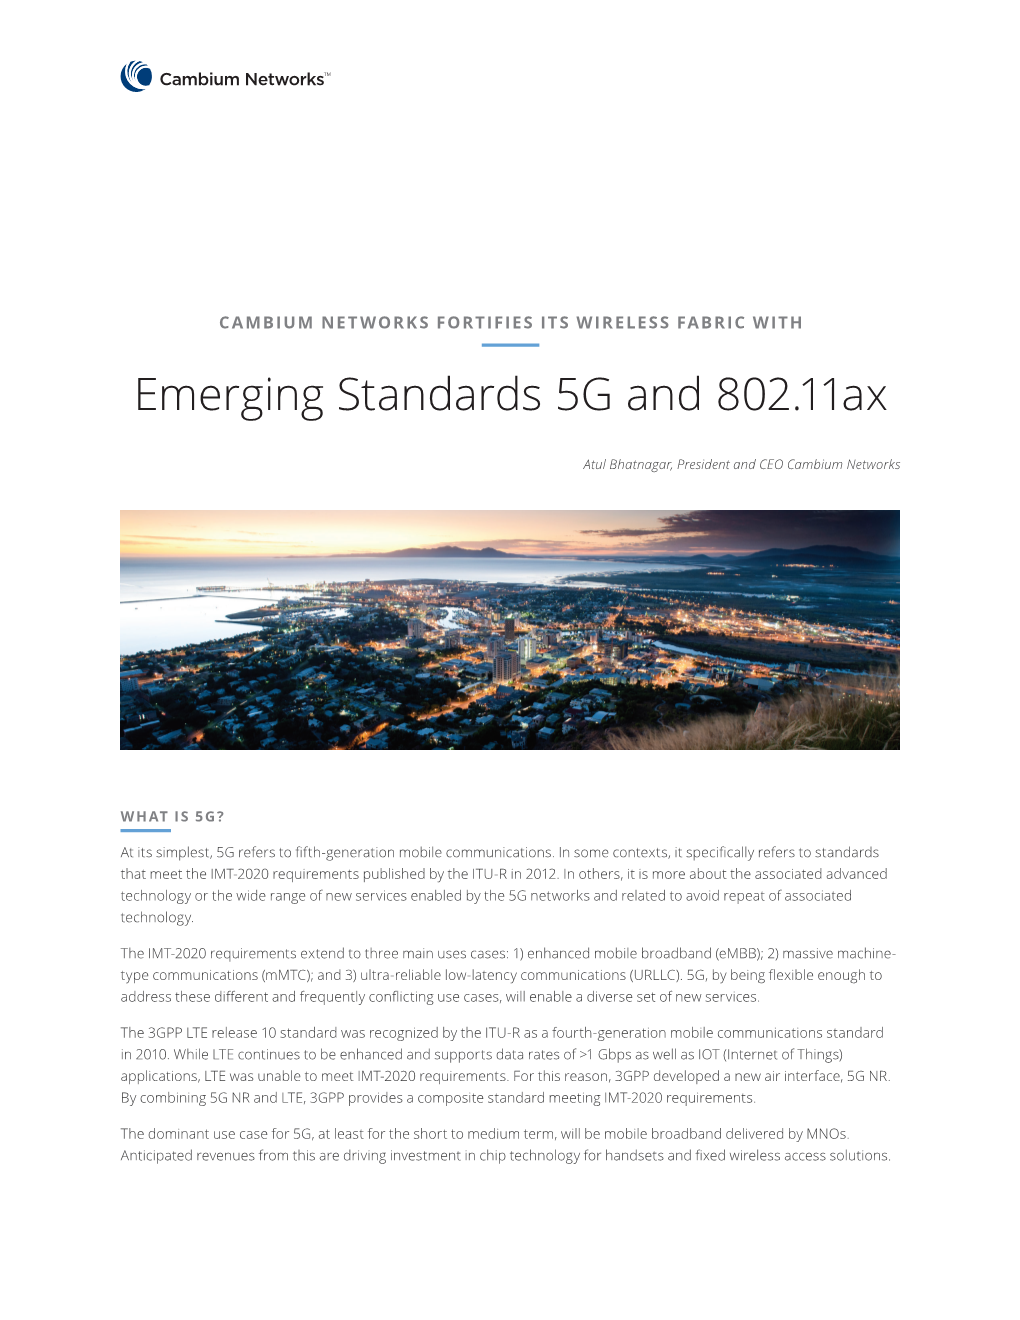 Emerging Standards 5G and 802.11Ax